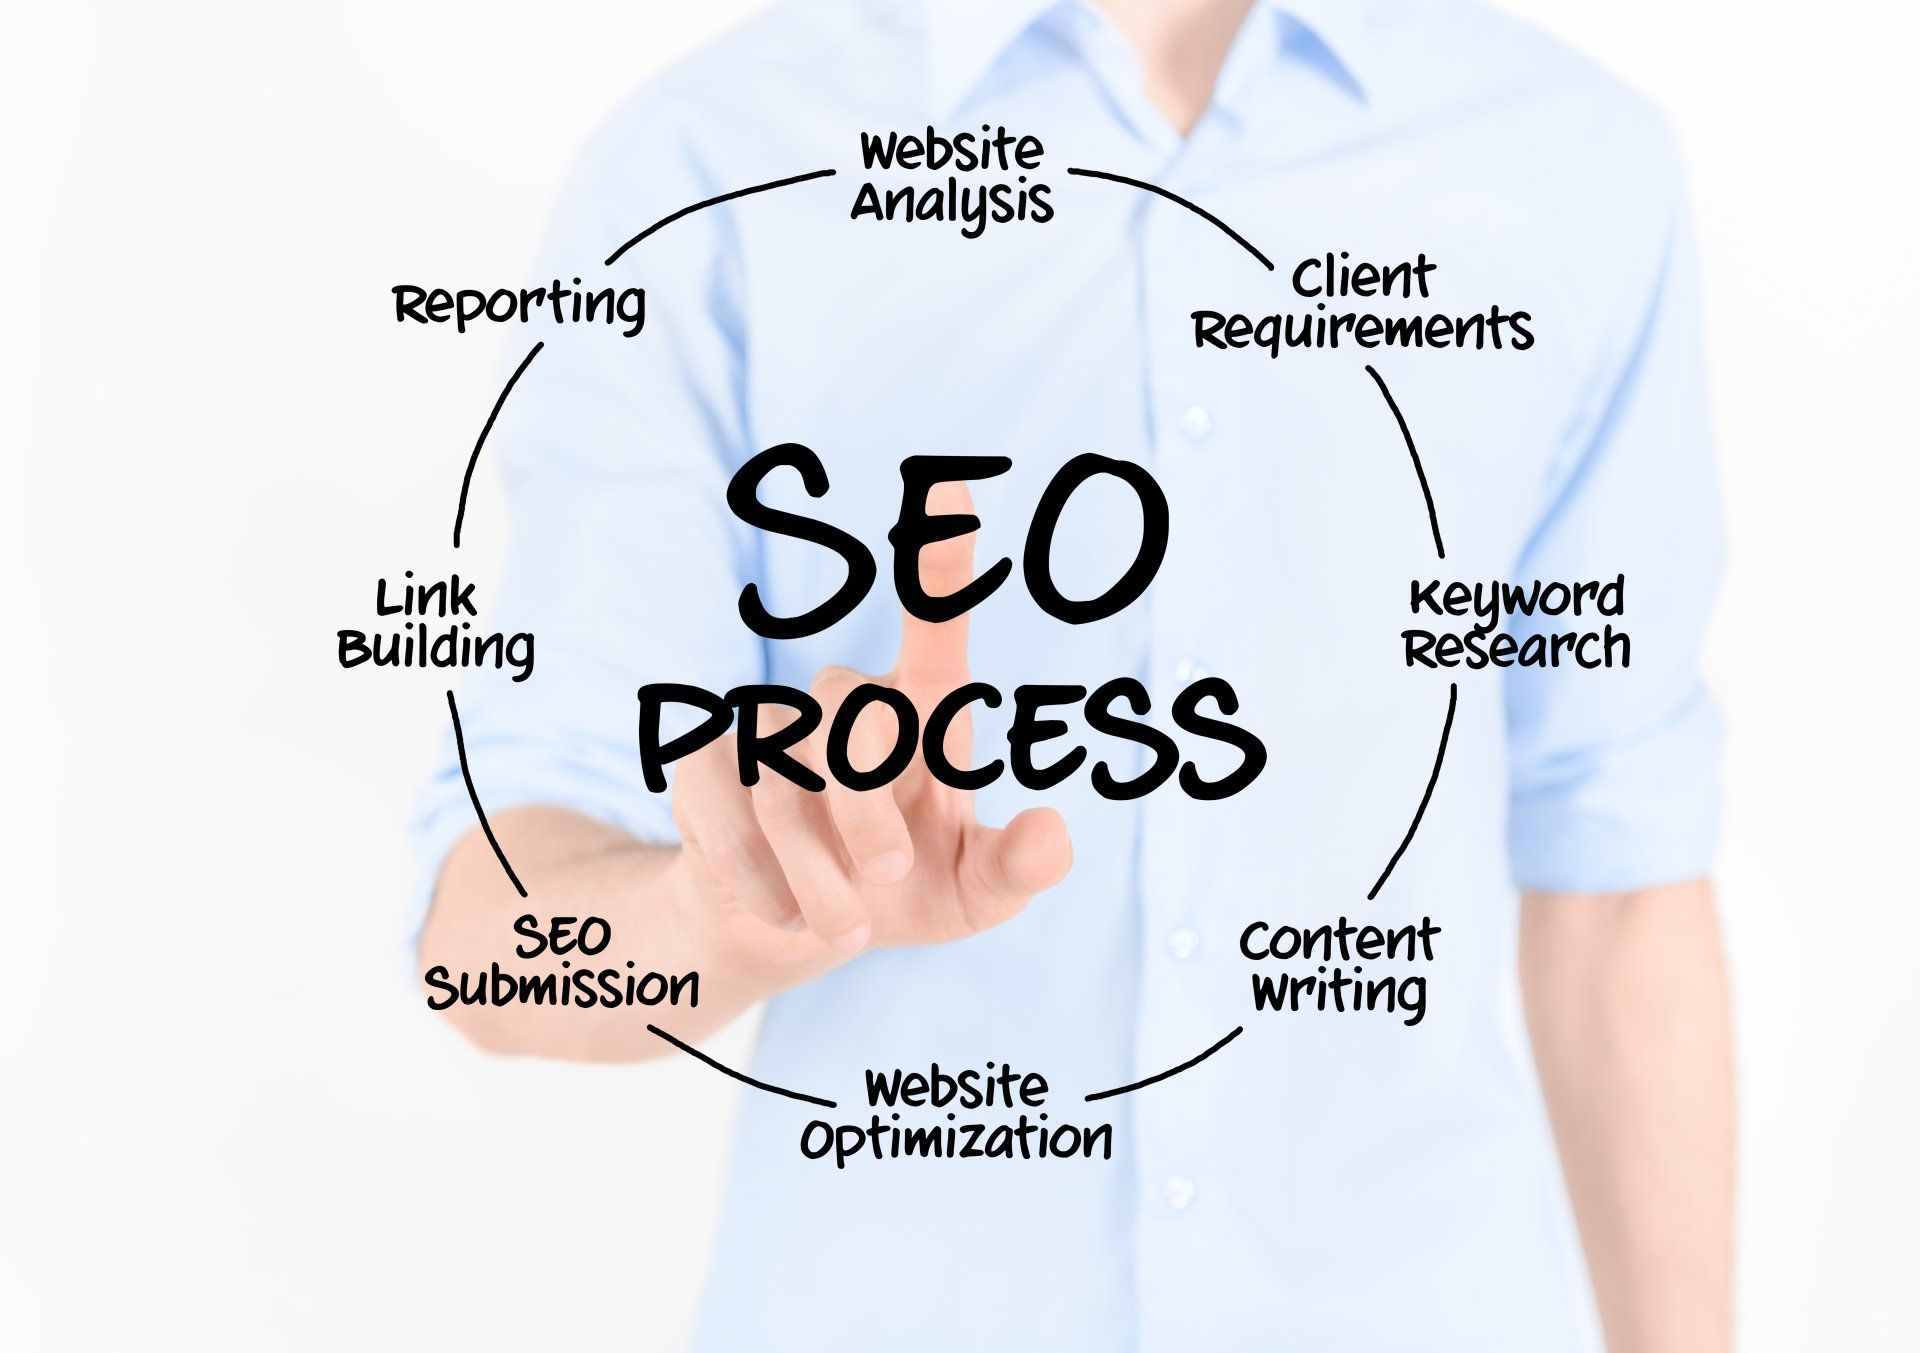 Image depicting the SEO Process